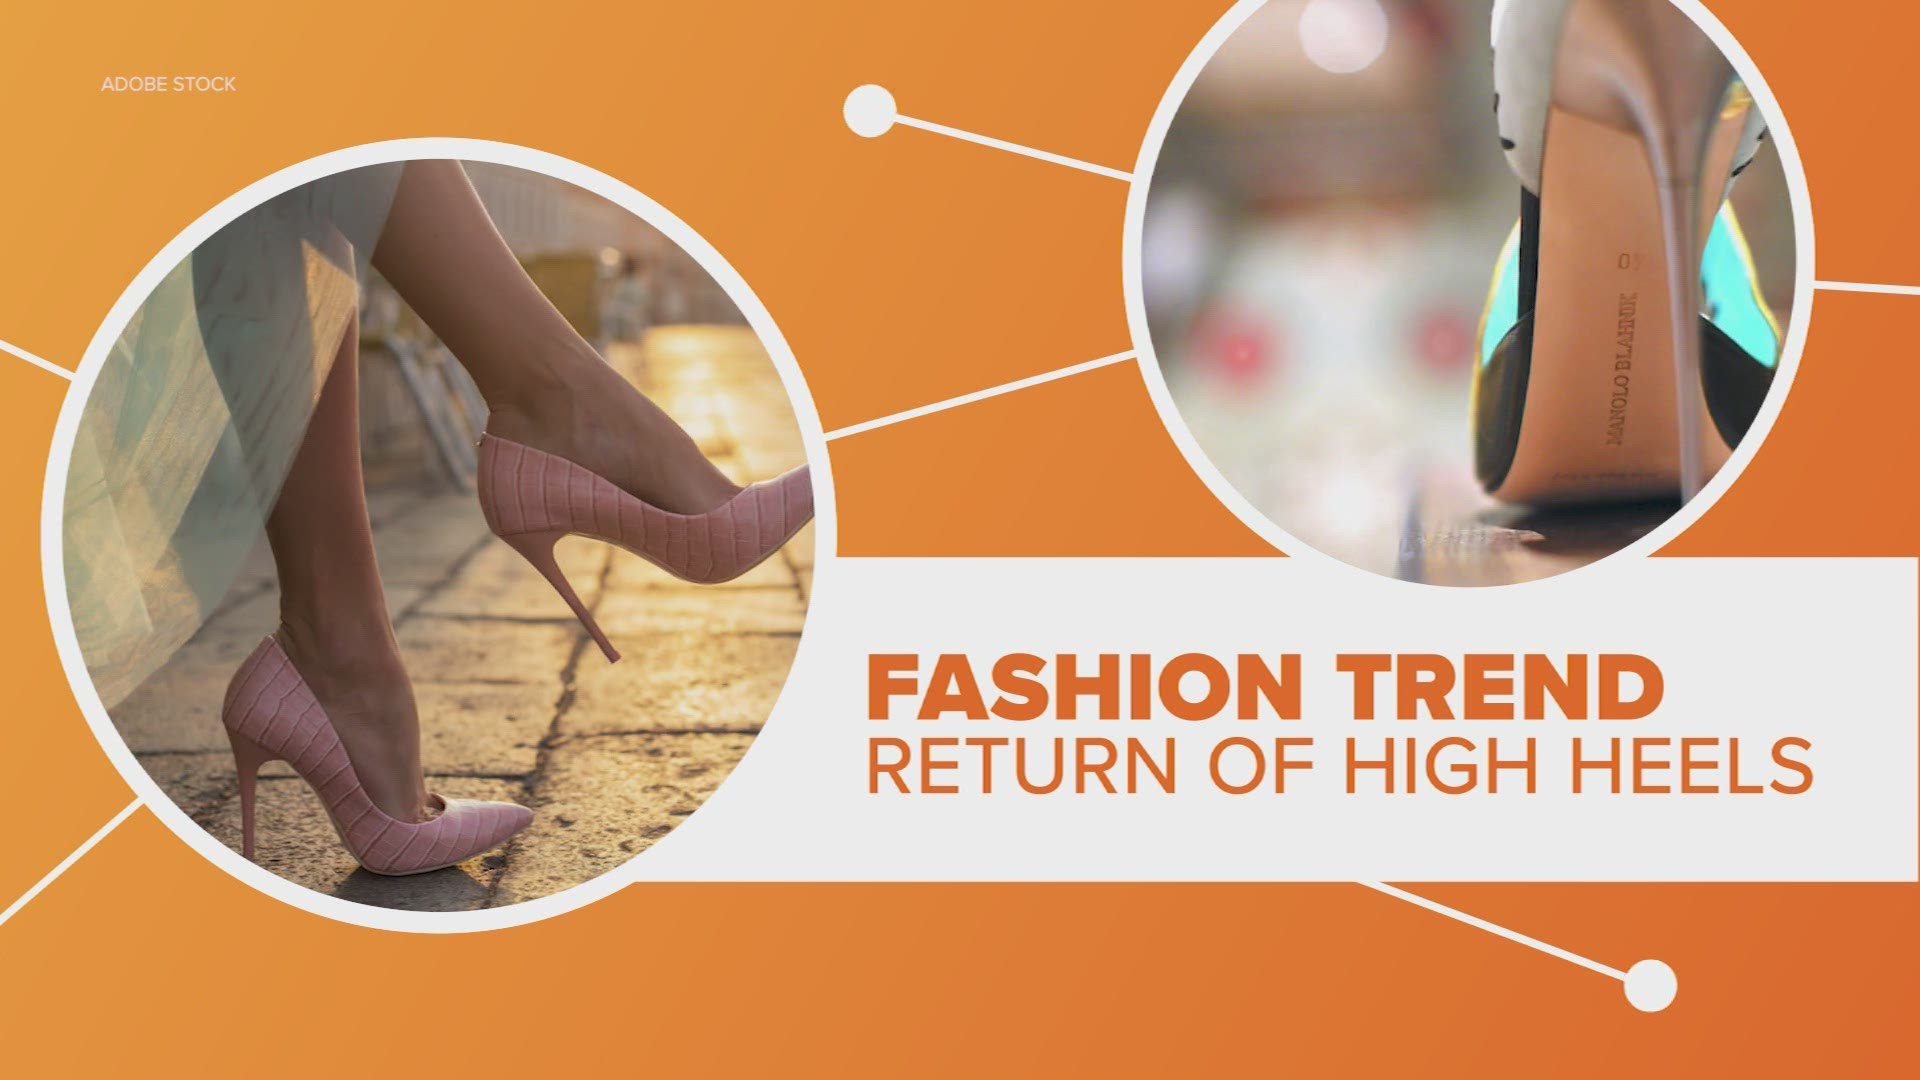 Fashion insiders are noticing an interesting trend, the return of sky-high heels. Let’s connect the dots.